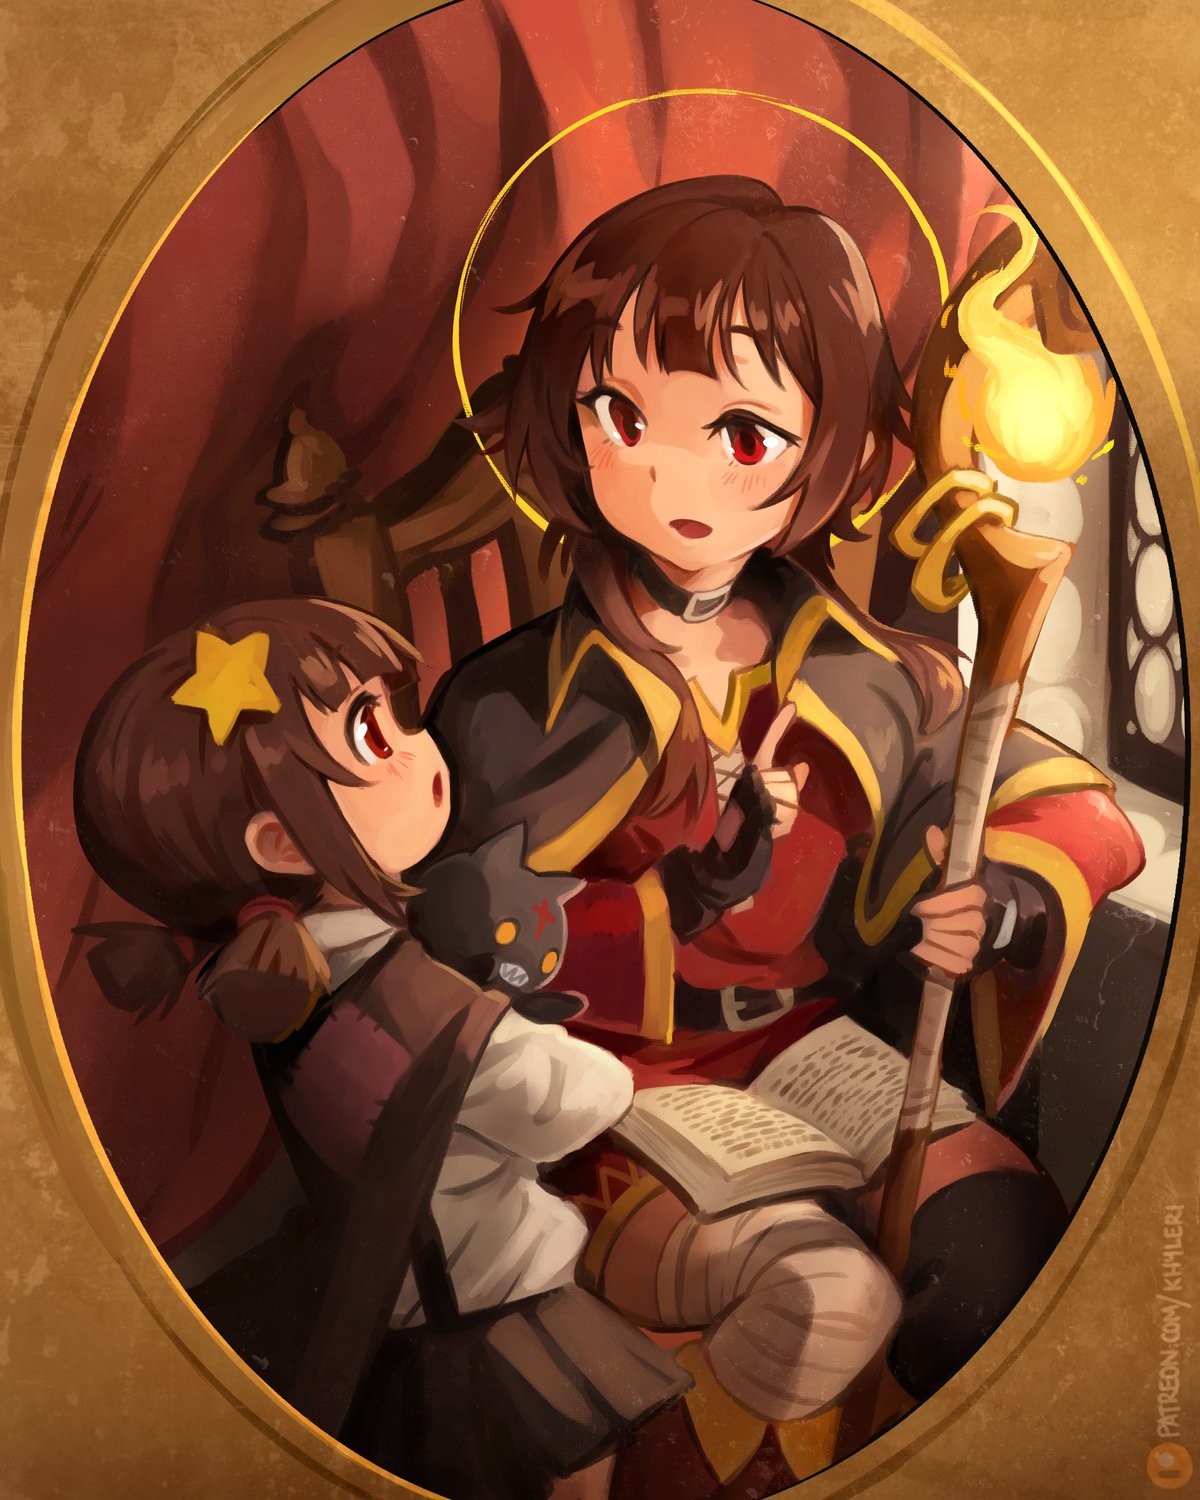 Daily Megu - 1103: Patron Saint of Arson. join list: DailySplosion (827 subs)Mention History Source: .. that poor dullahan.